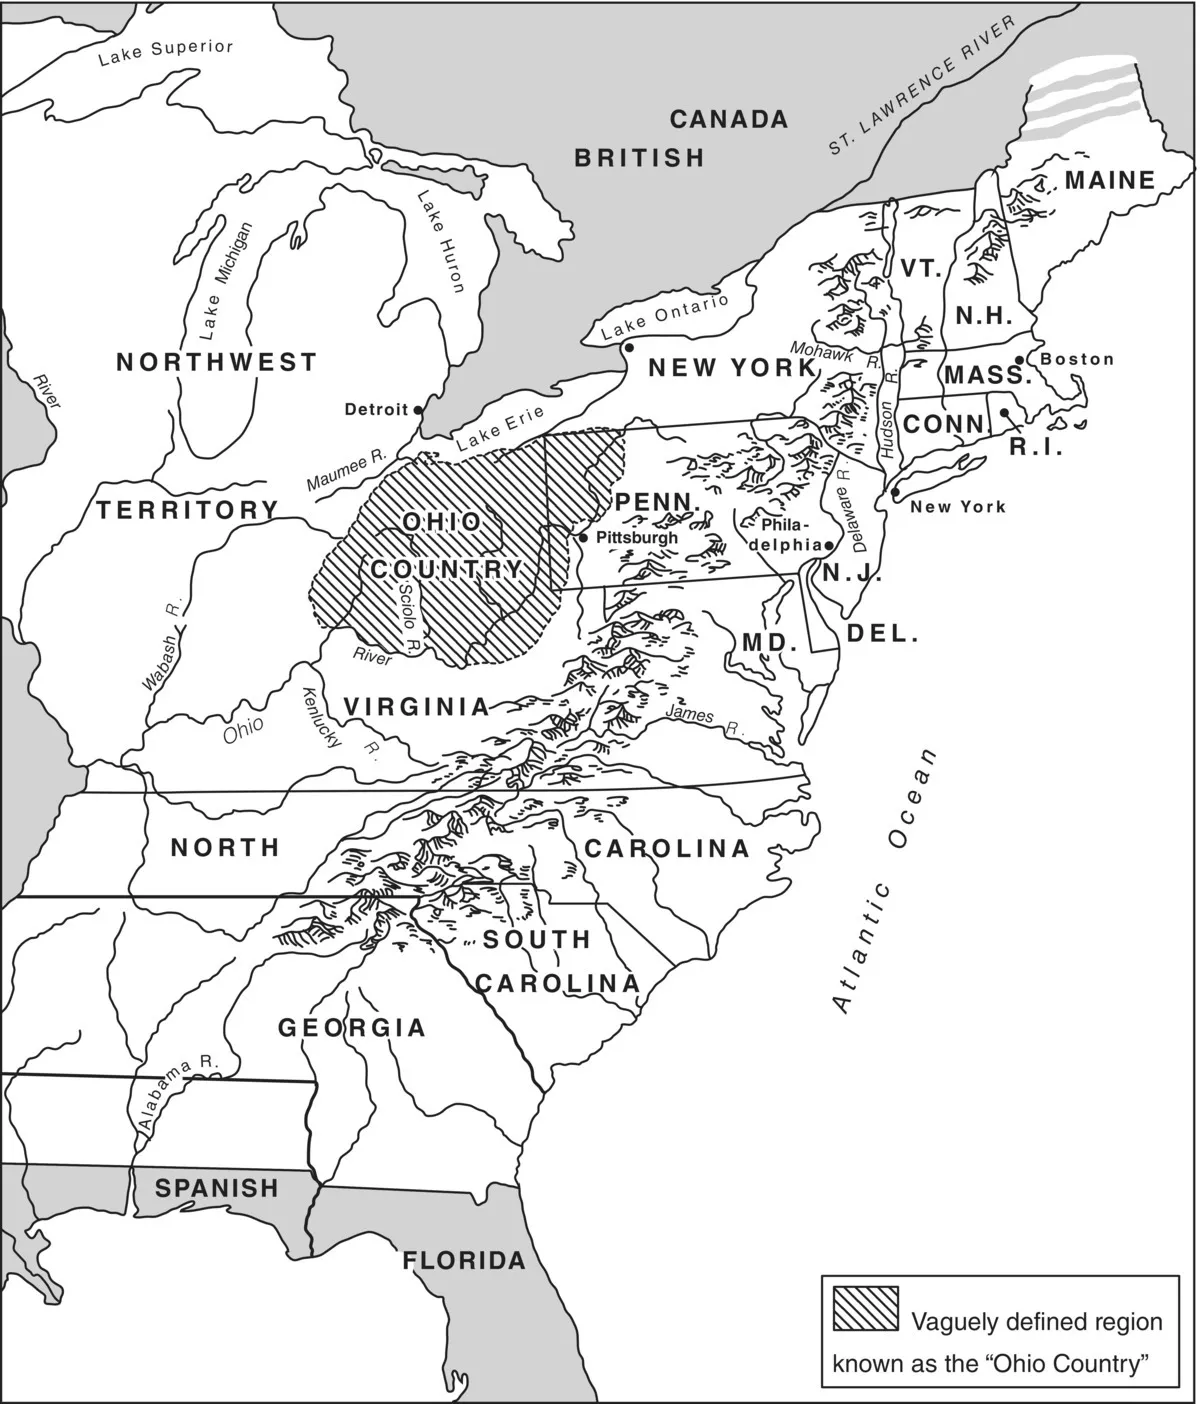 Map of the East Coast region of the United States of America identifying the Ohio Country (in diagonal grids) surrounded by the Northwest Territory (left), Virginia (bottom), and Pennsylvania (right).